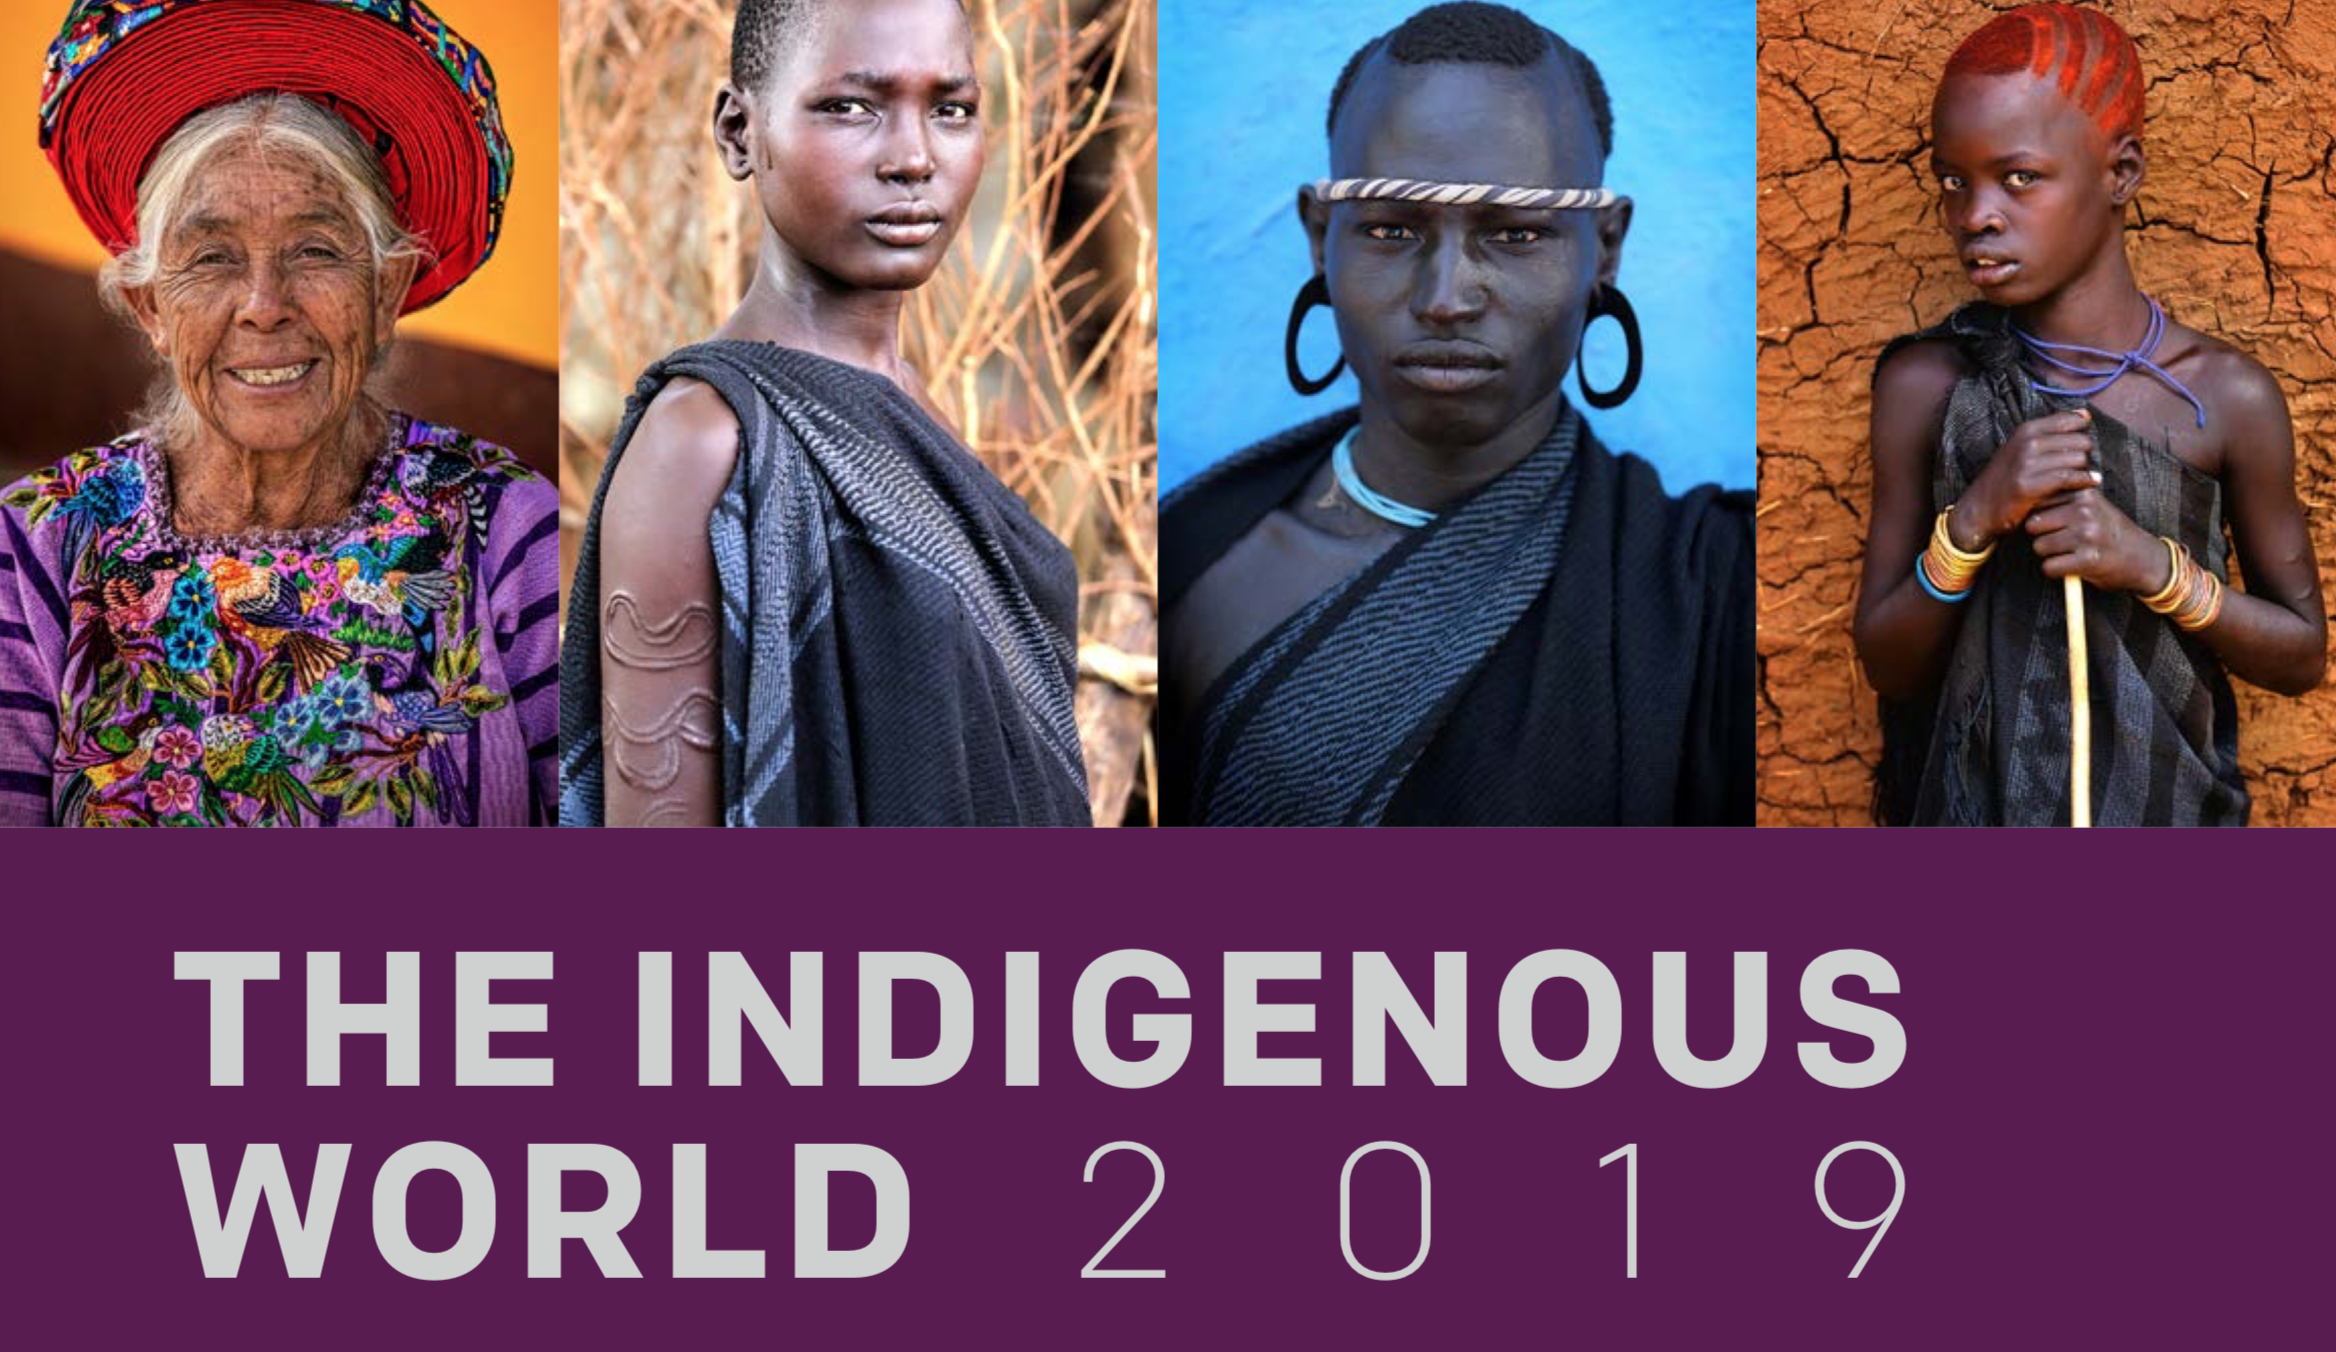 THE INDIGENOUS WORLD 2019